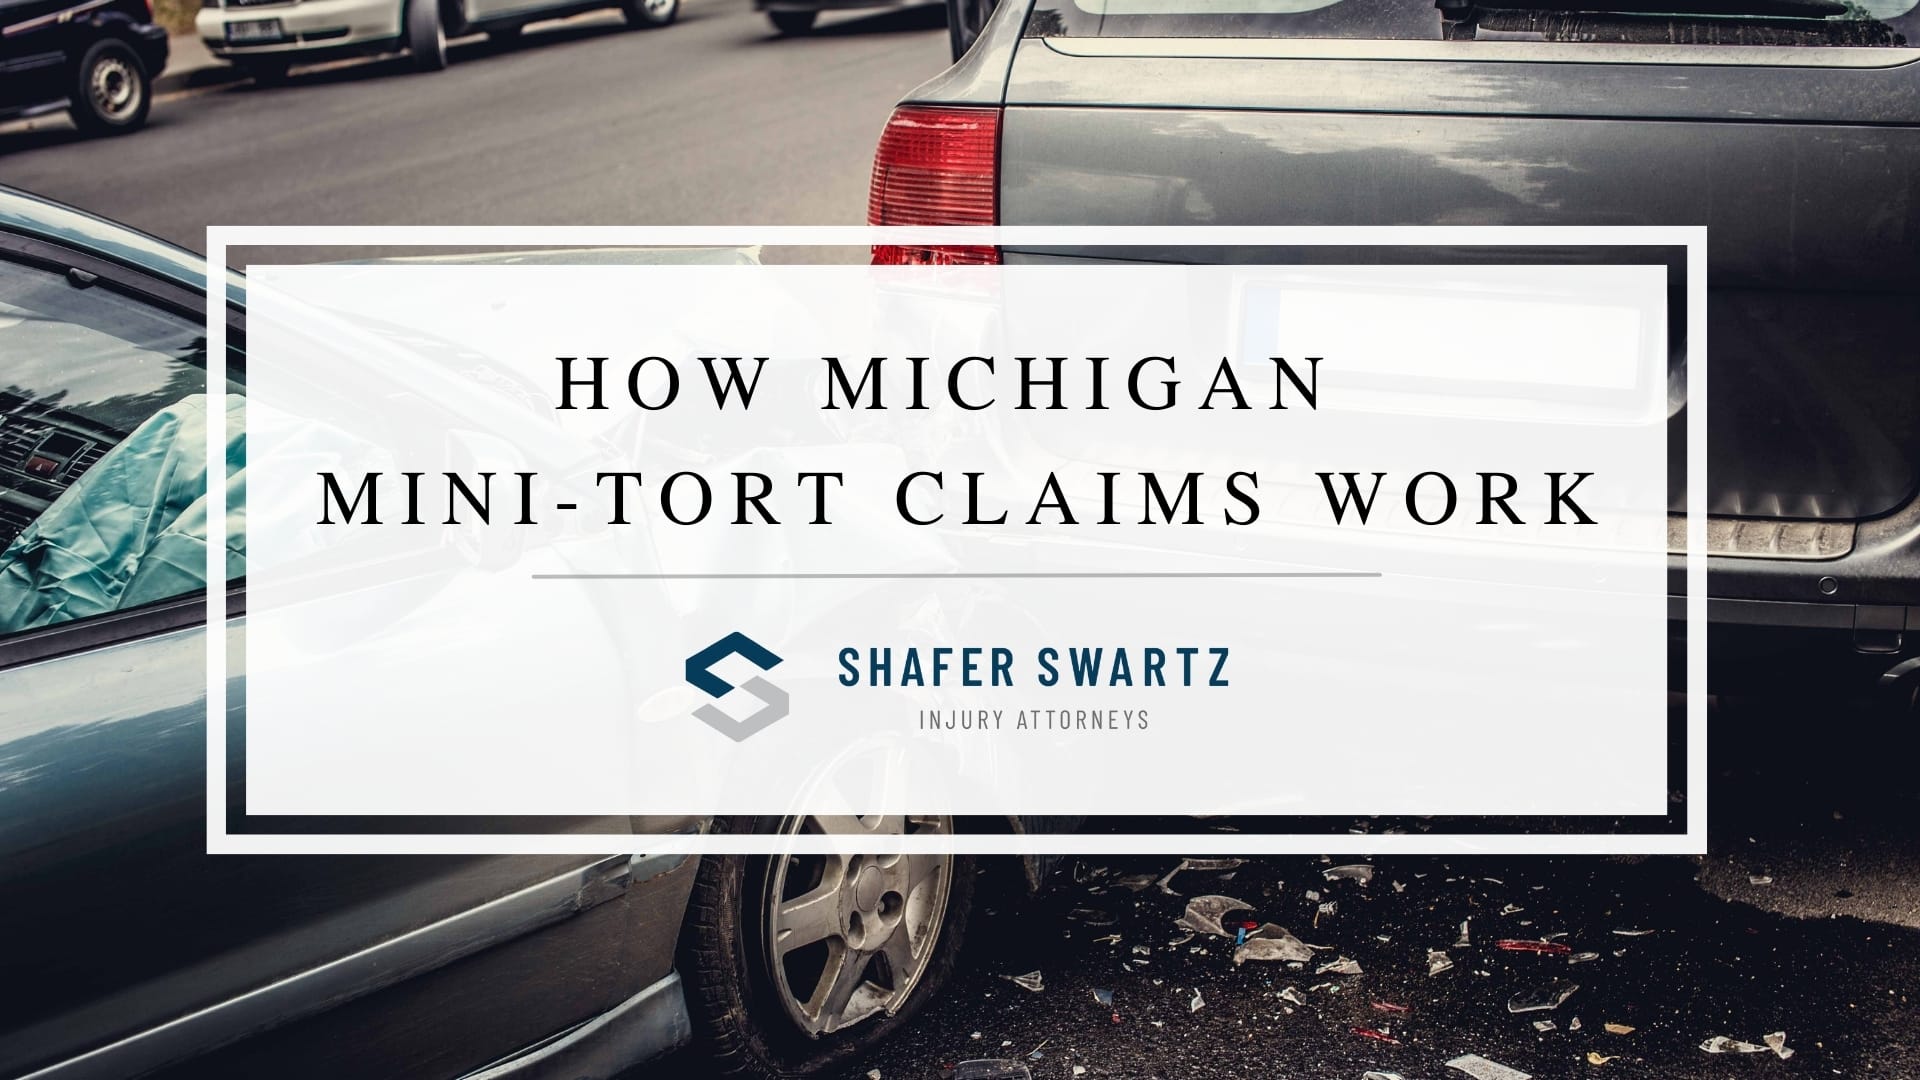 Parking Lot Accident Laws in Michigan: What You Need To Know